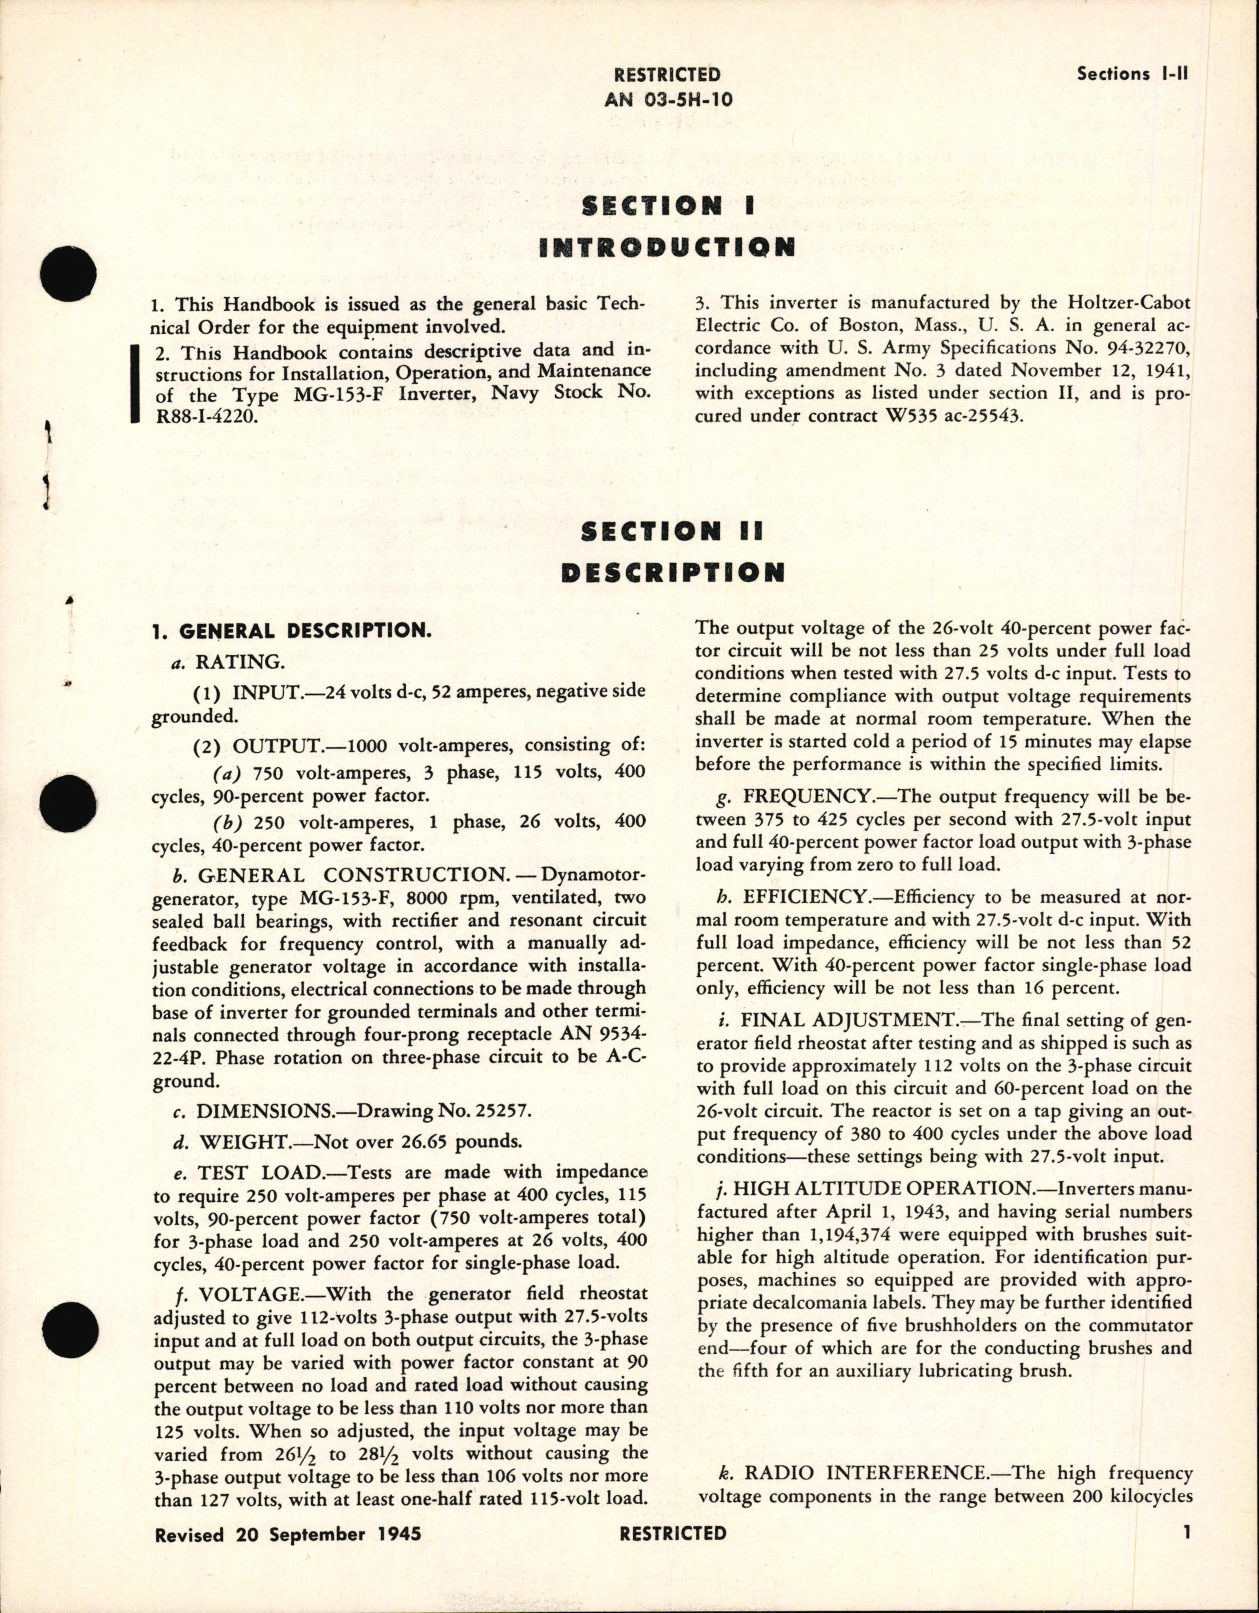 Sample page 5 from AirCorps Library document: Operation, Service & Overhaul Instructions with Parts Catalog for Inverter Type MG-153F (R88-I-4220)